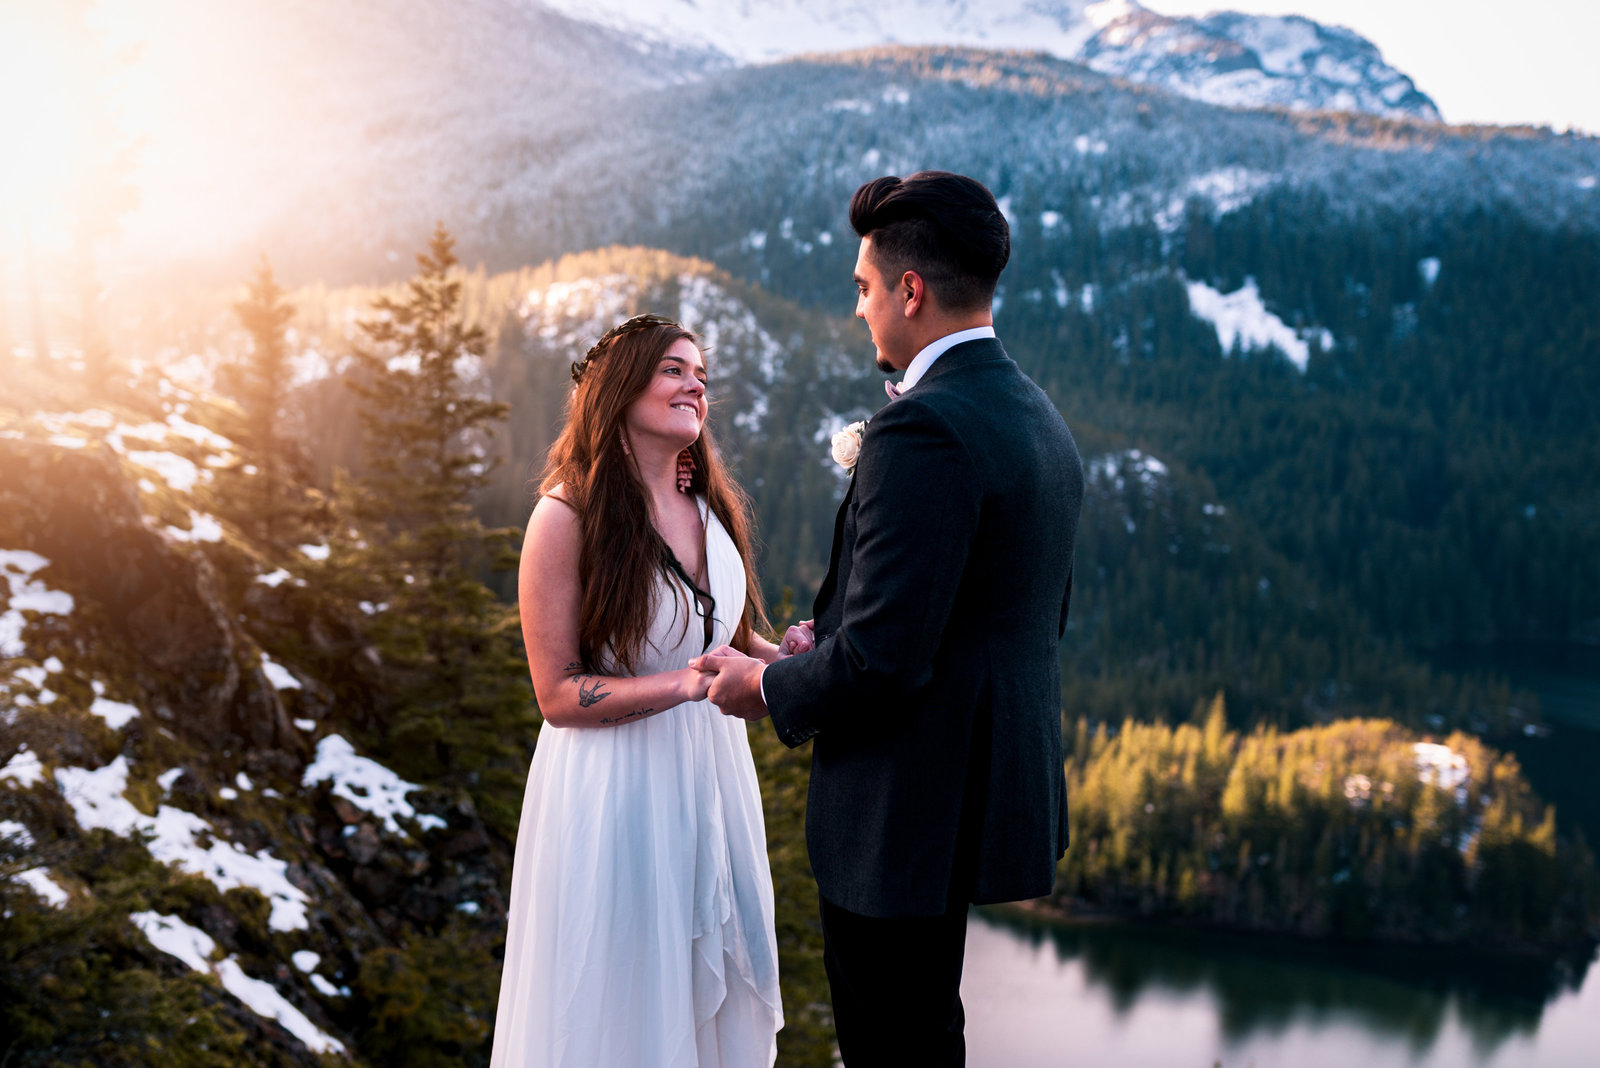 Wedding ceremony in the mountains, with couple in wedding attire, smiling at each other.